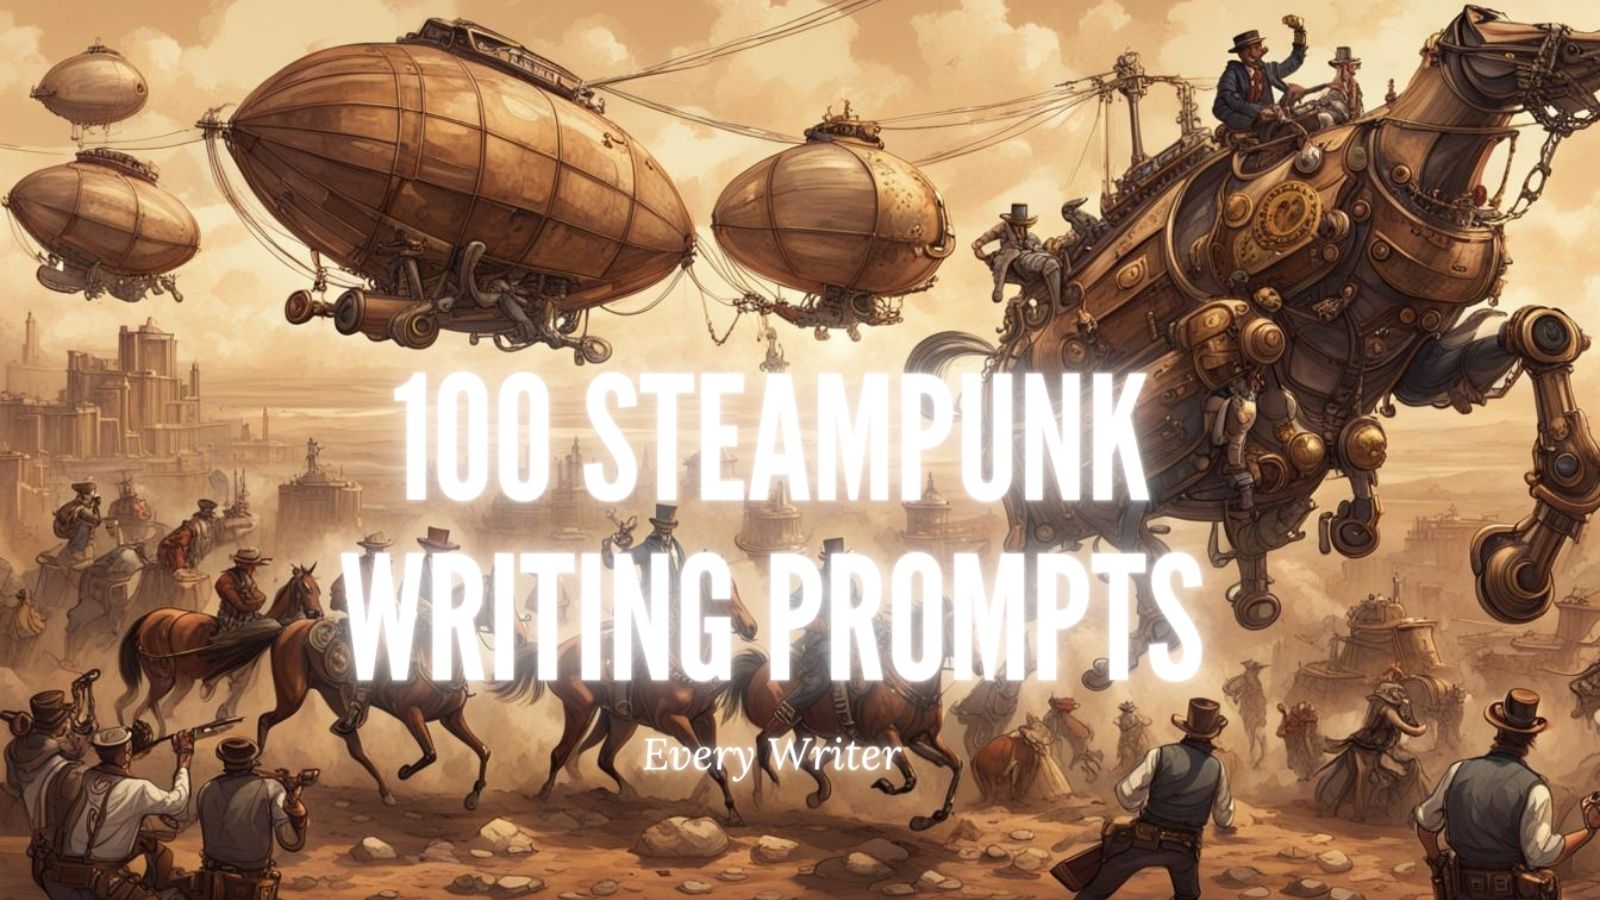 00 steampunk writing prompts